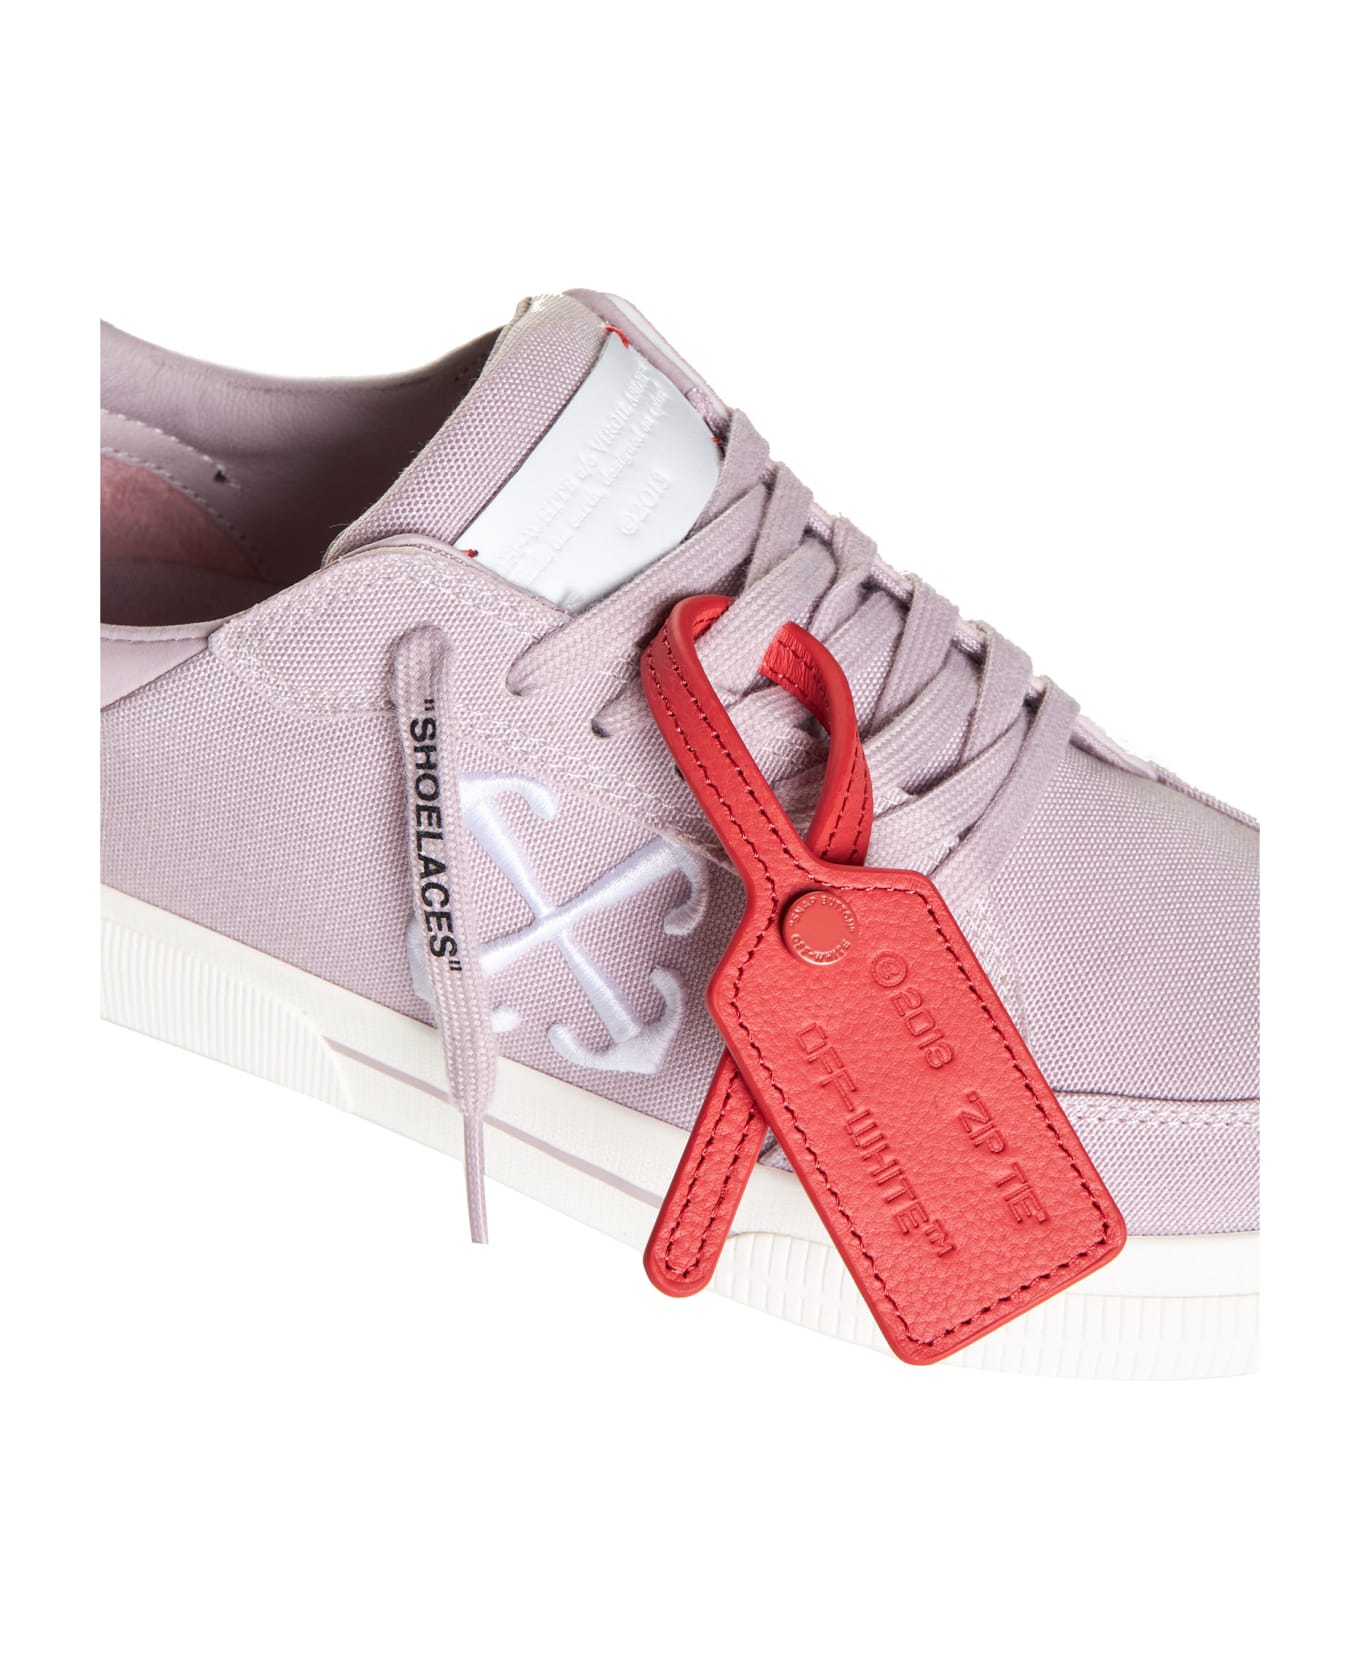 Off-White Sneakers - Lilac white